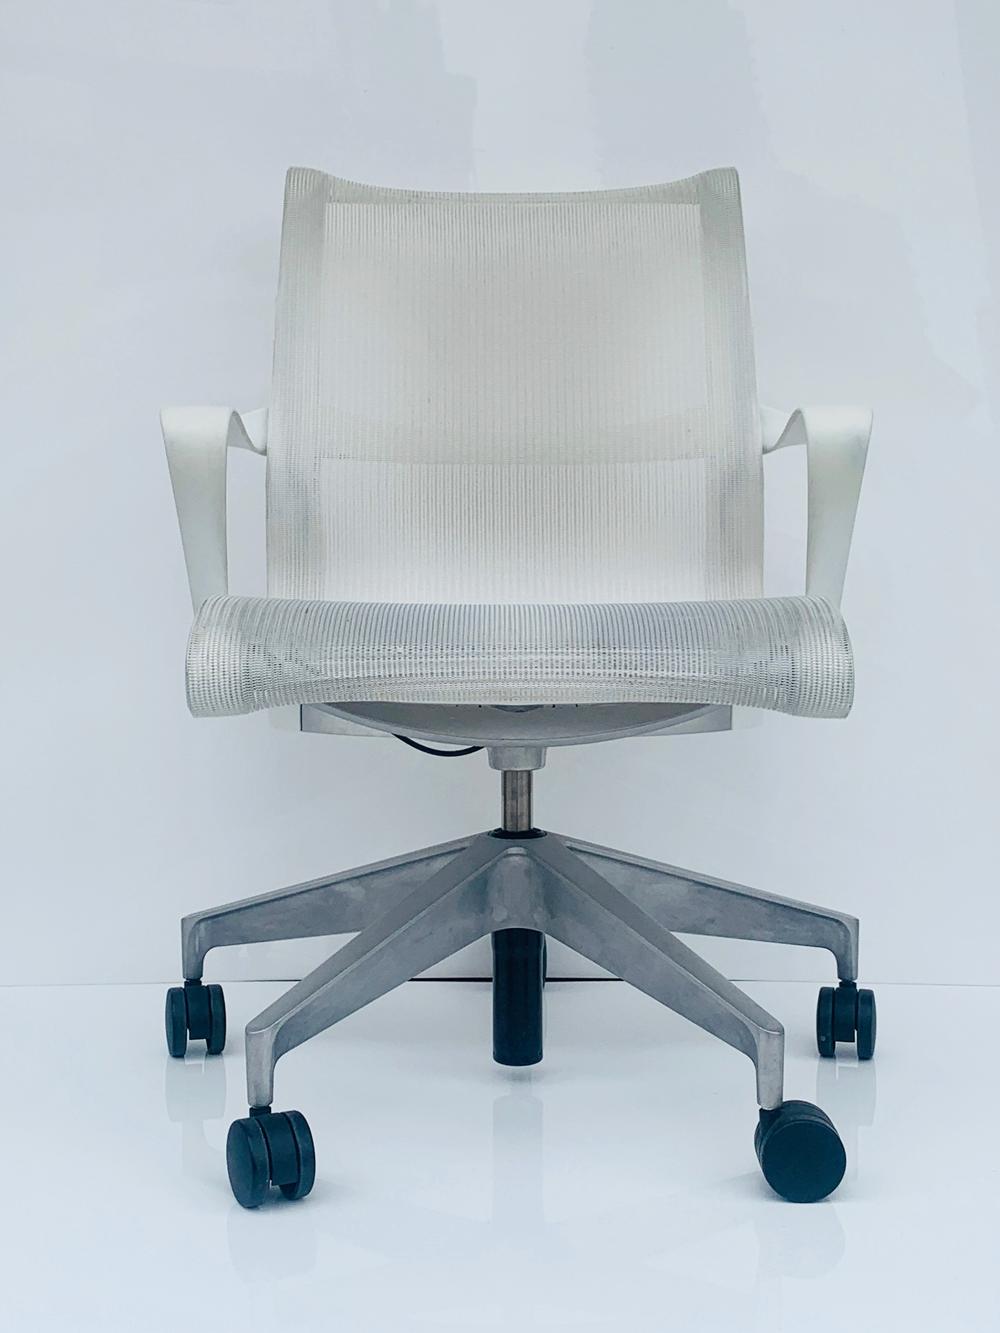 We have 6 chairs total, this listing is for one chair.

Design Studio 7.5, 2009
Die-cast aluminum, LyrisÂ™ fabric
Made by Herman Miller

Measurements:
37.25-32.50 inches adjustable height x 23.50 wide x 26 inches deep x 27.50-23.25 arm height